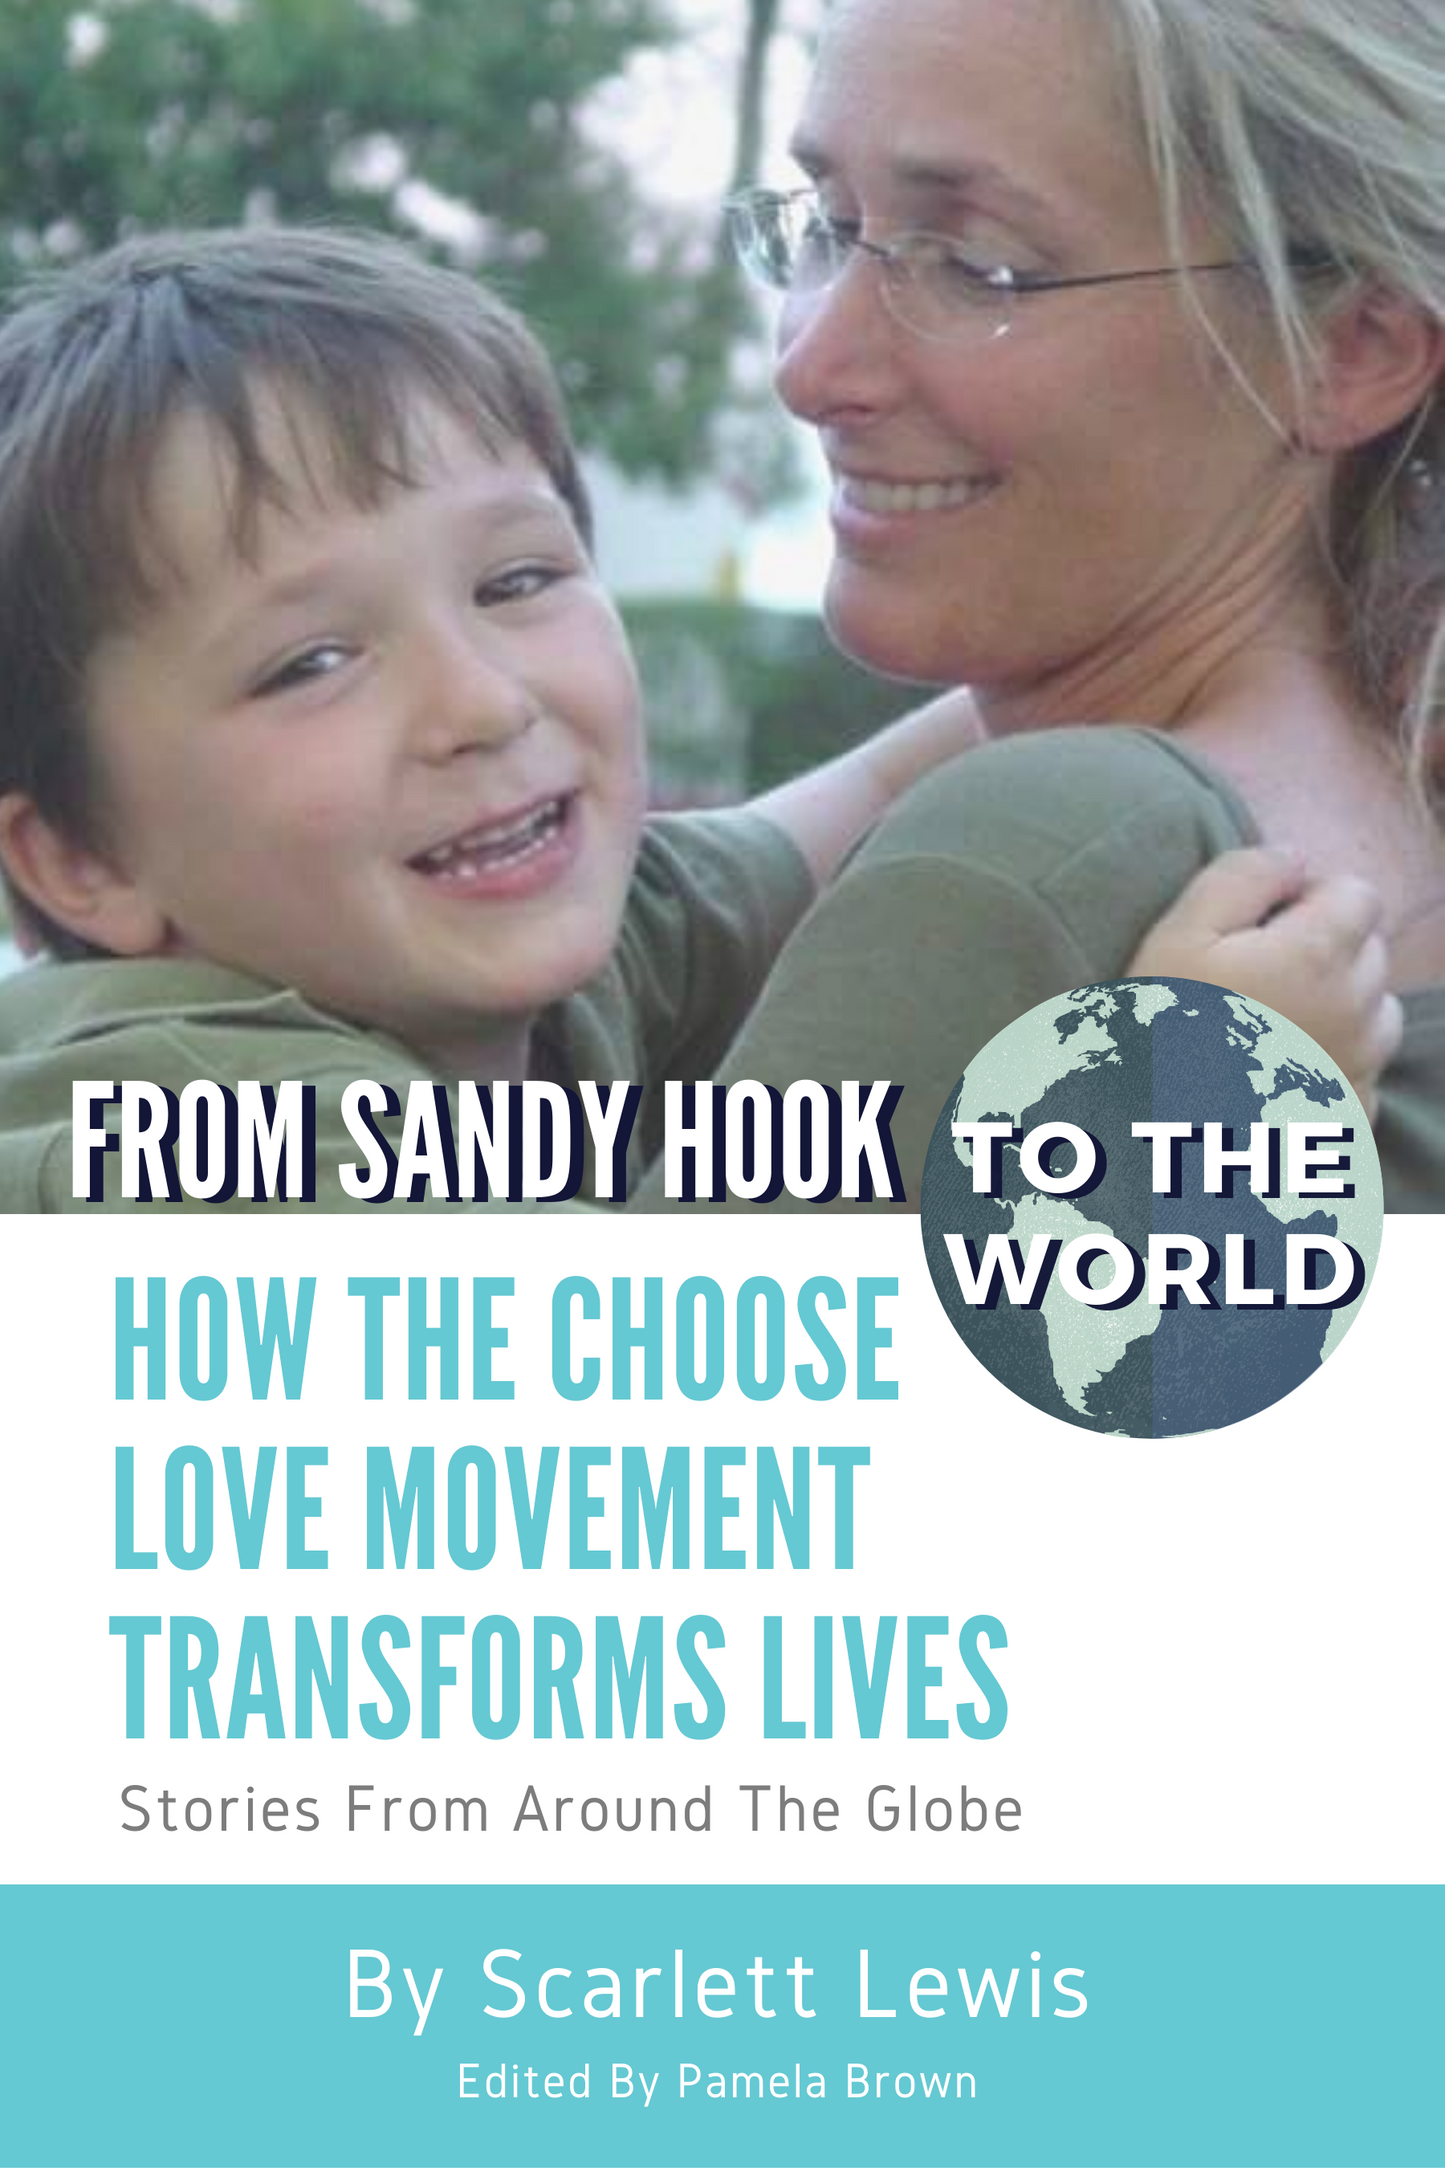 From Sandy Hook to the World (Paperback) - SIGNED